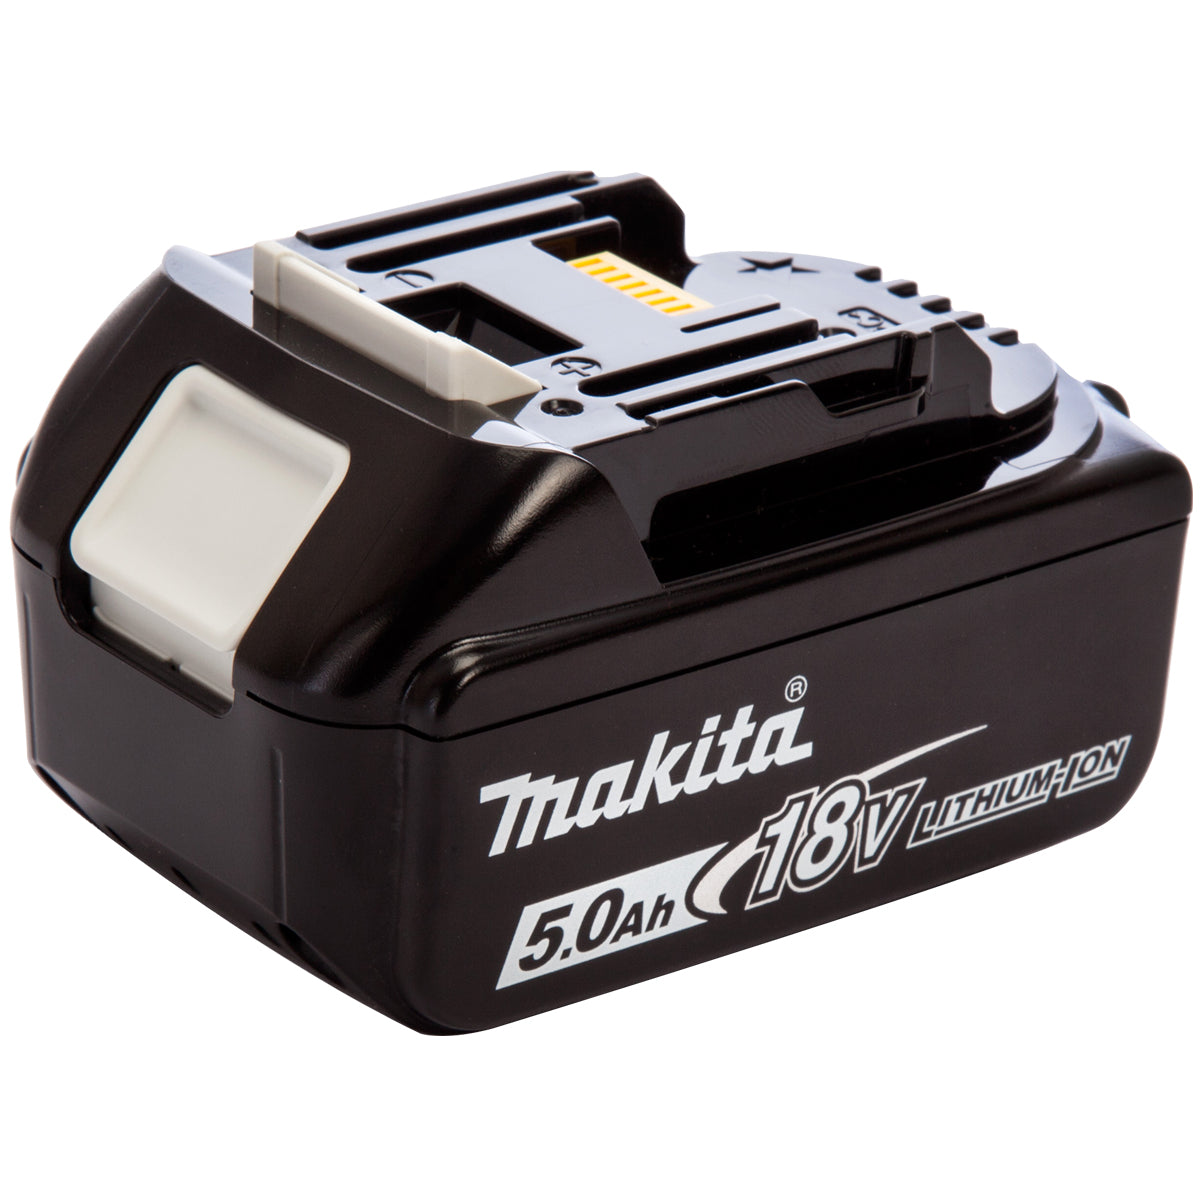 Makita 18V 6 Piece Kit with 3 x 5.0Ah Batteries Charger & Free 100 Accessory Set T4TKIT-7316